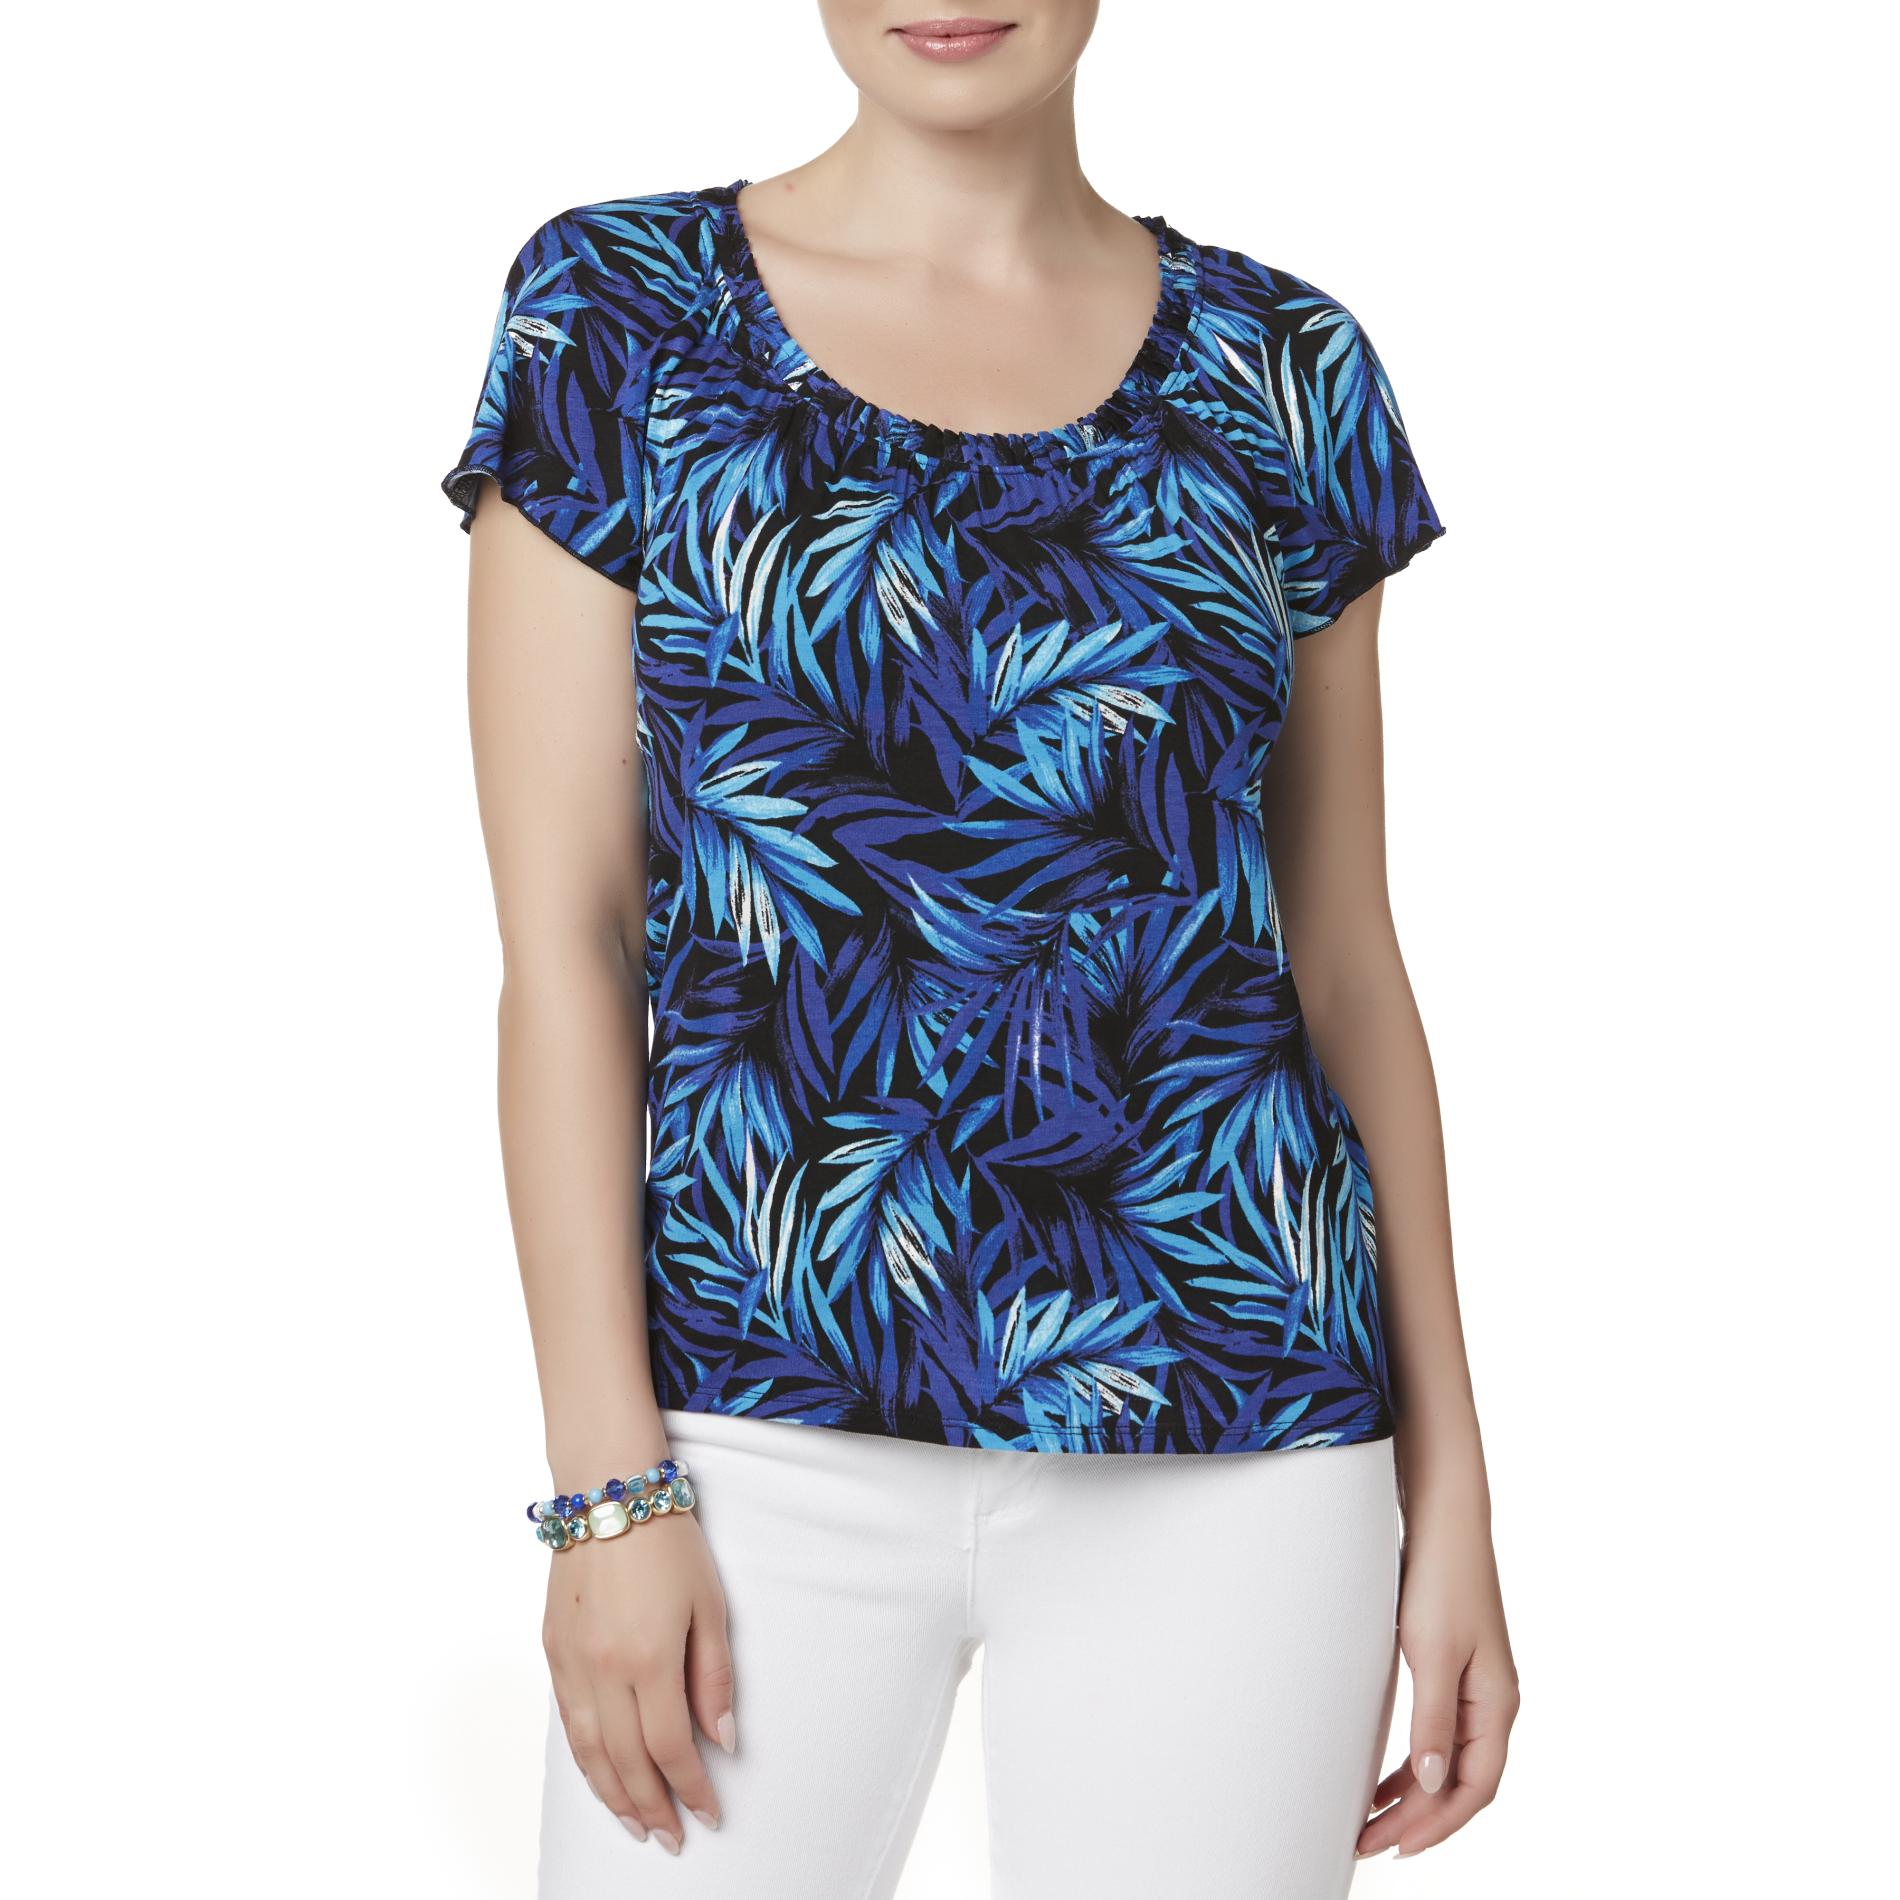 Jaclyn Smith Women's Peasant Top - Palm Leaf Print